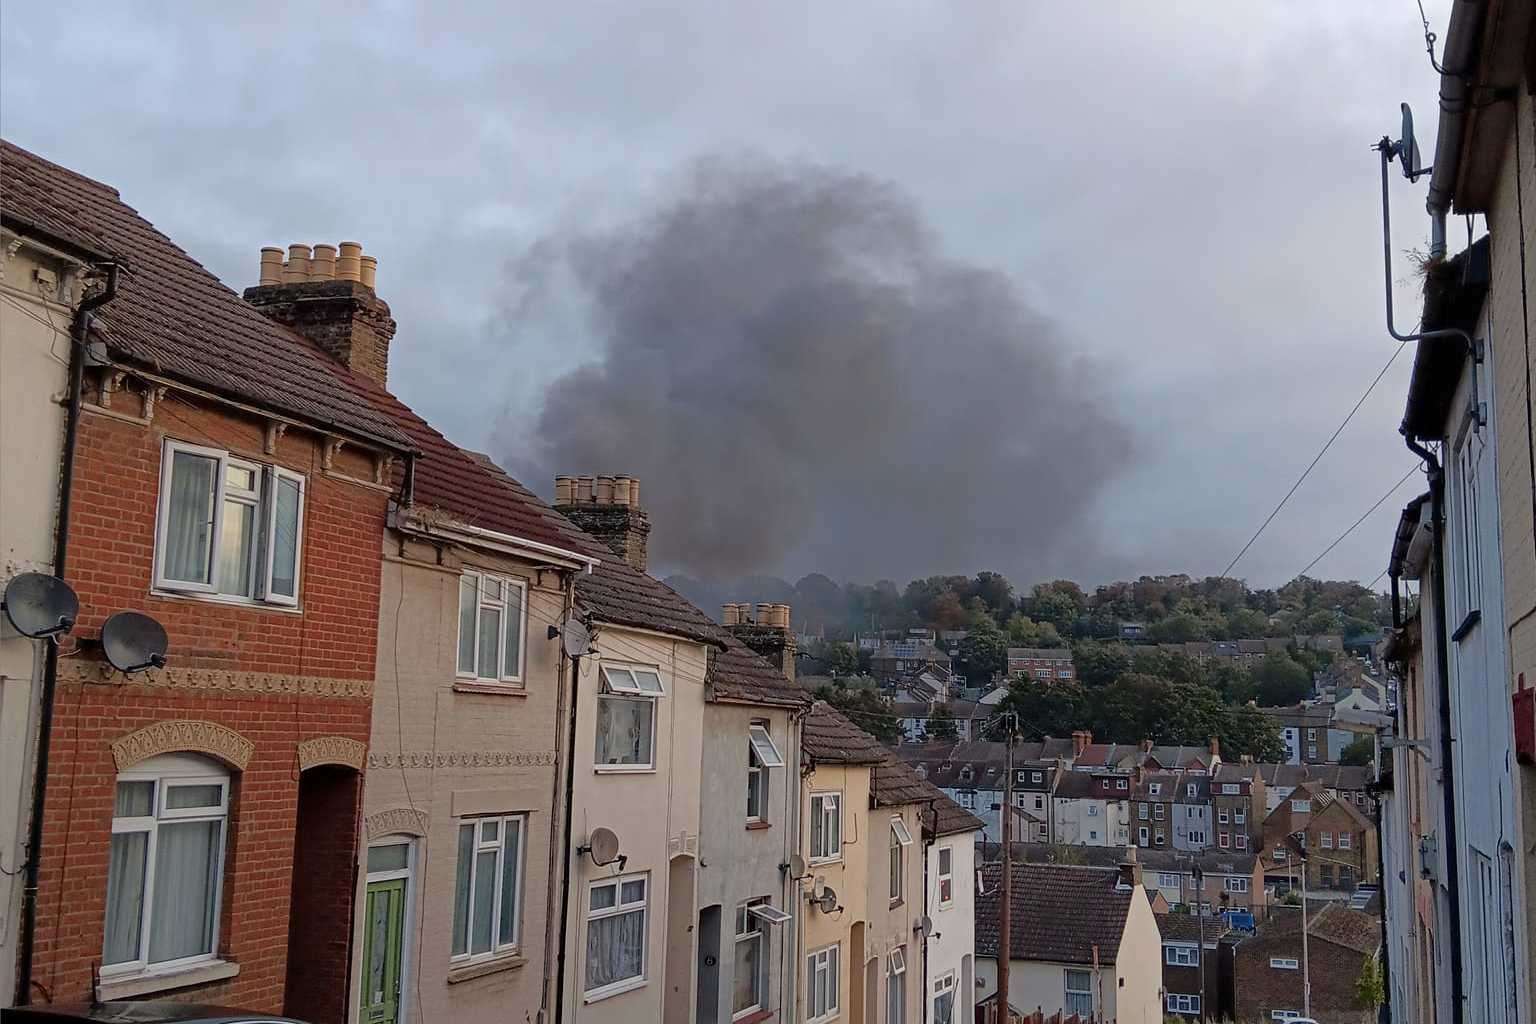 Black smoke could be seen from across Chatham. Picture: Maxine Anne Radford